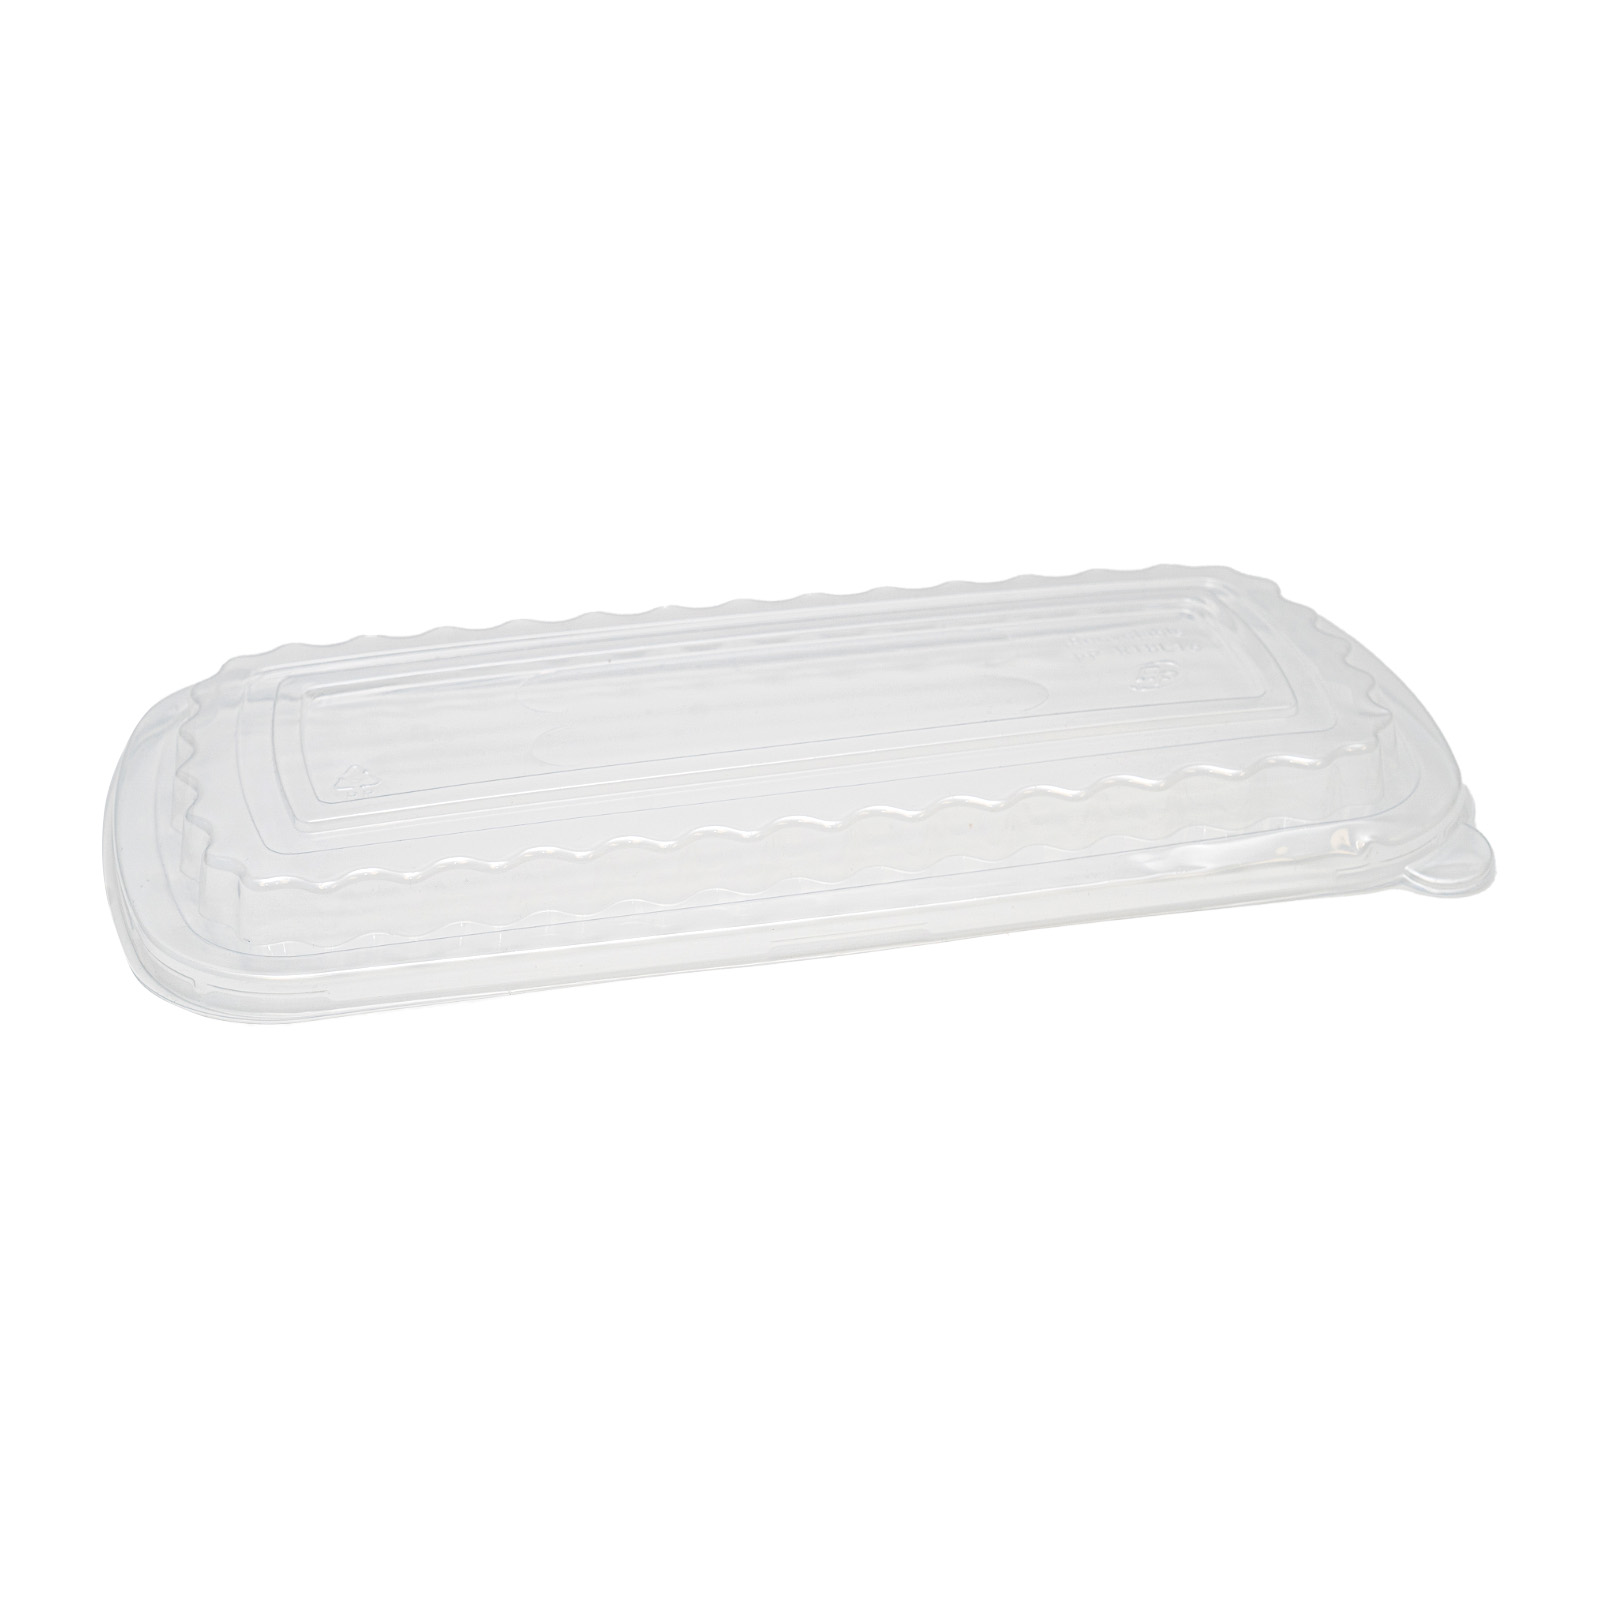 Recyclable Rib Tray Lid - 200/Case